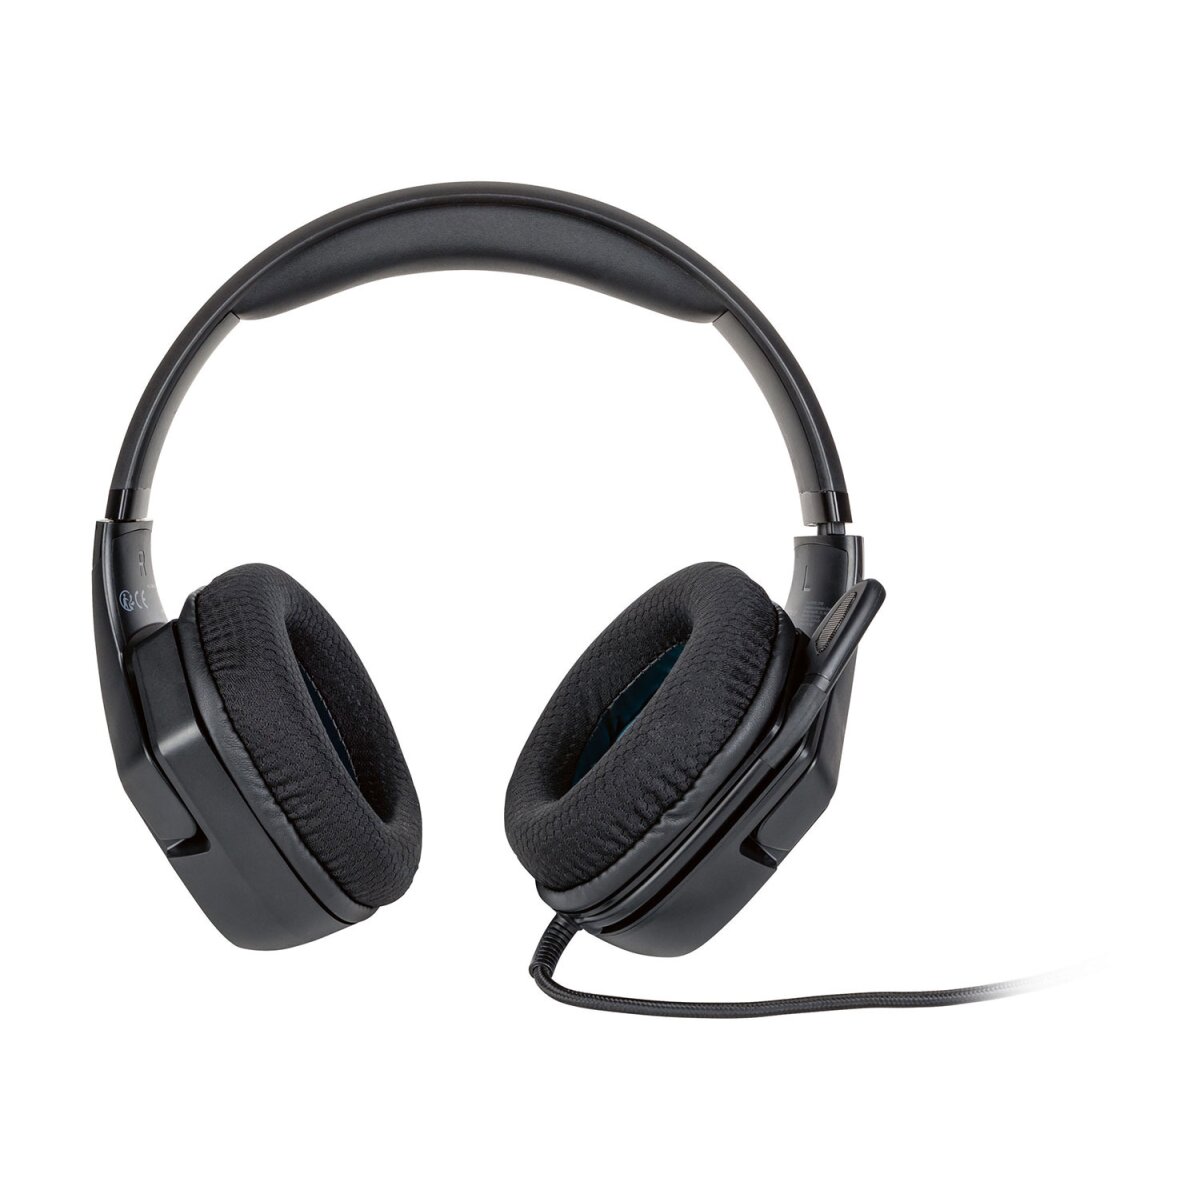 15,99 - sehr gut, SILVERCREST® Gaming 7.1 € B-Ware Headset